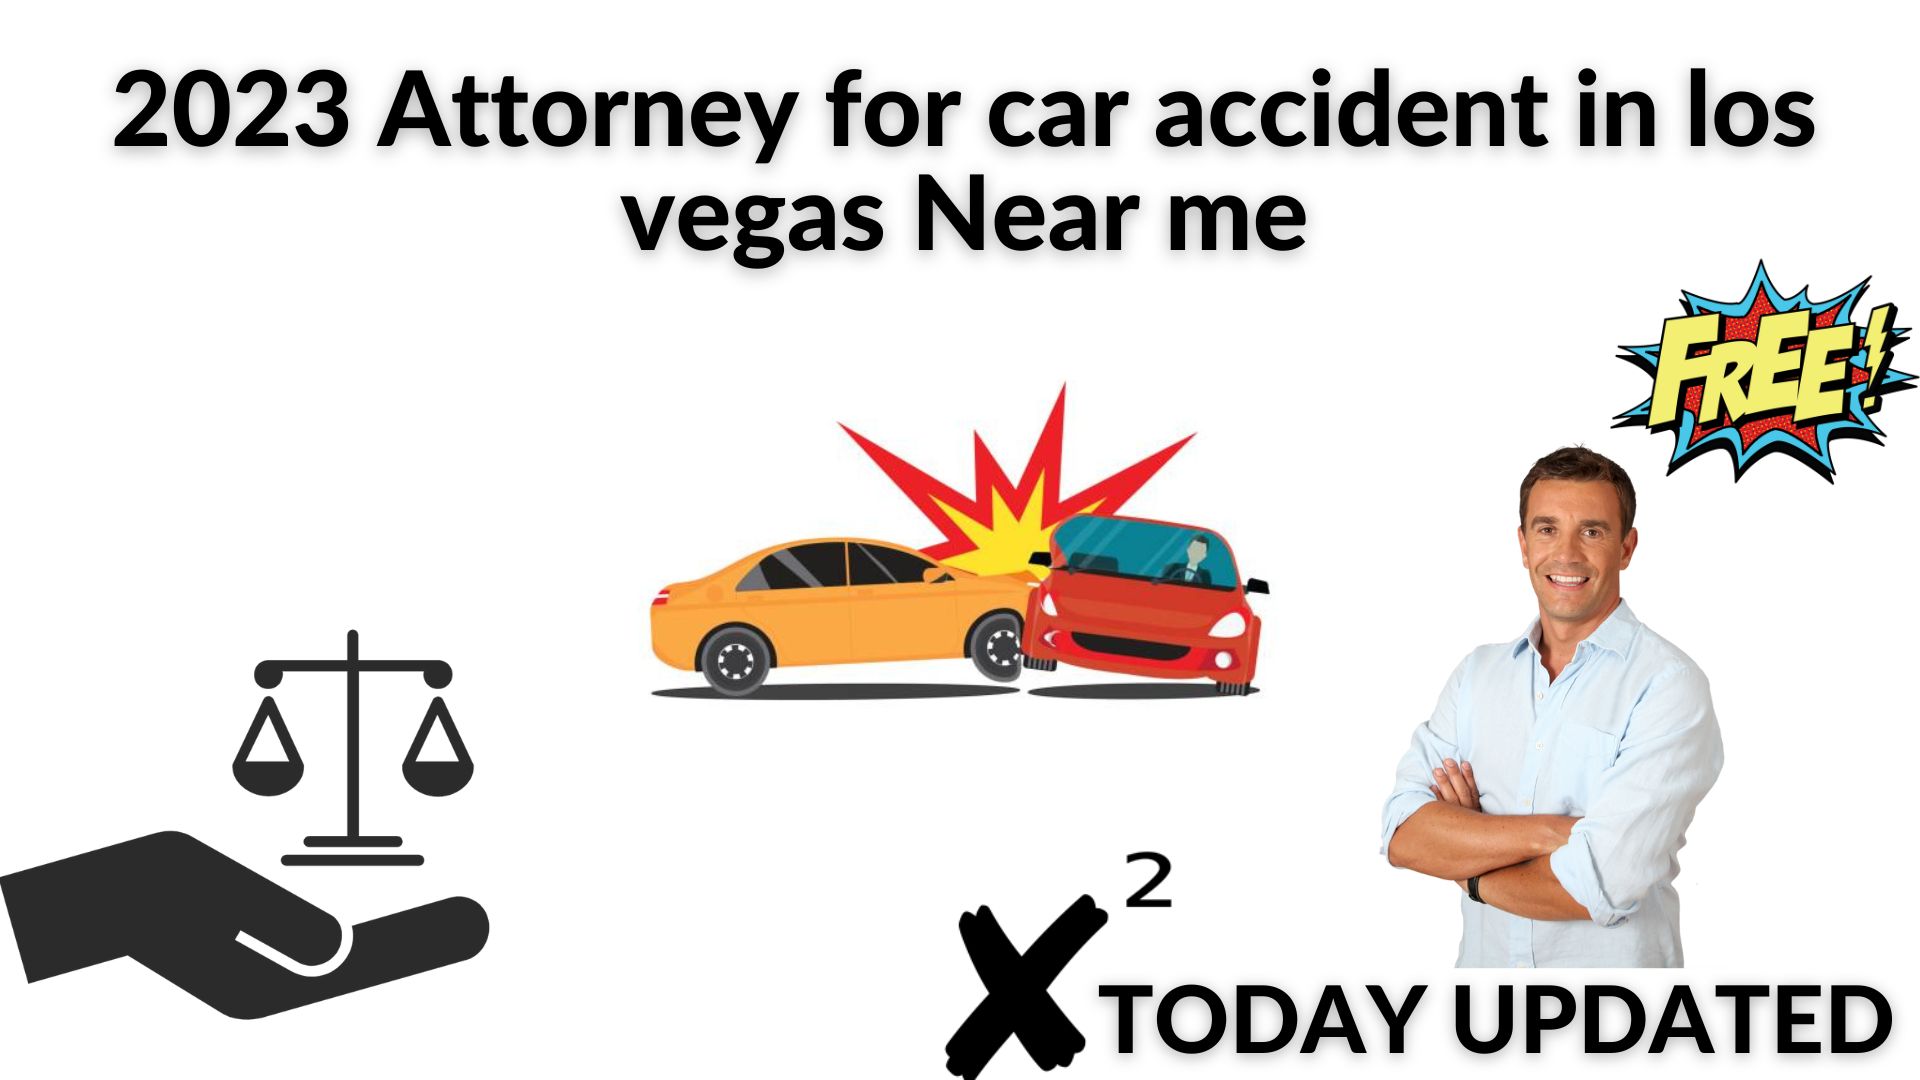 2023 attorney for car accident in los vegas near me